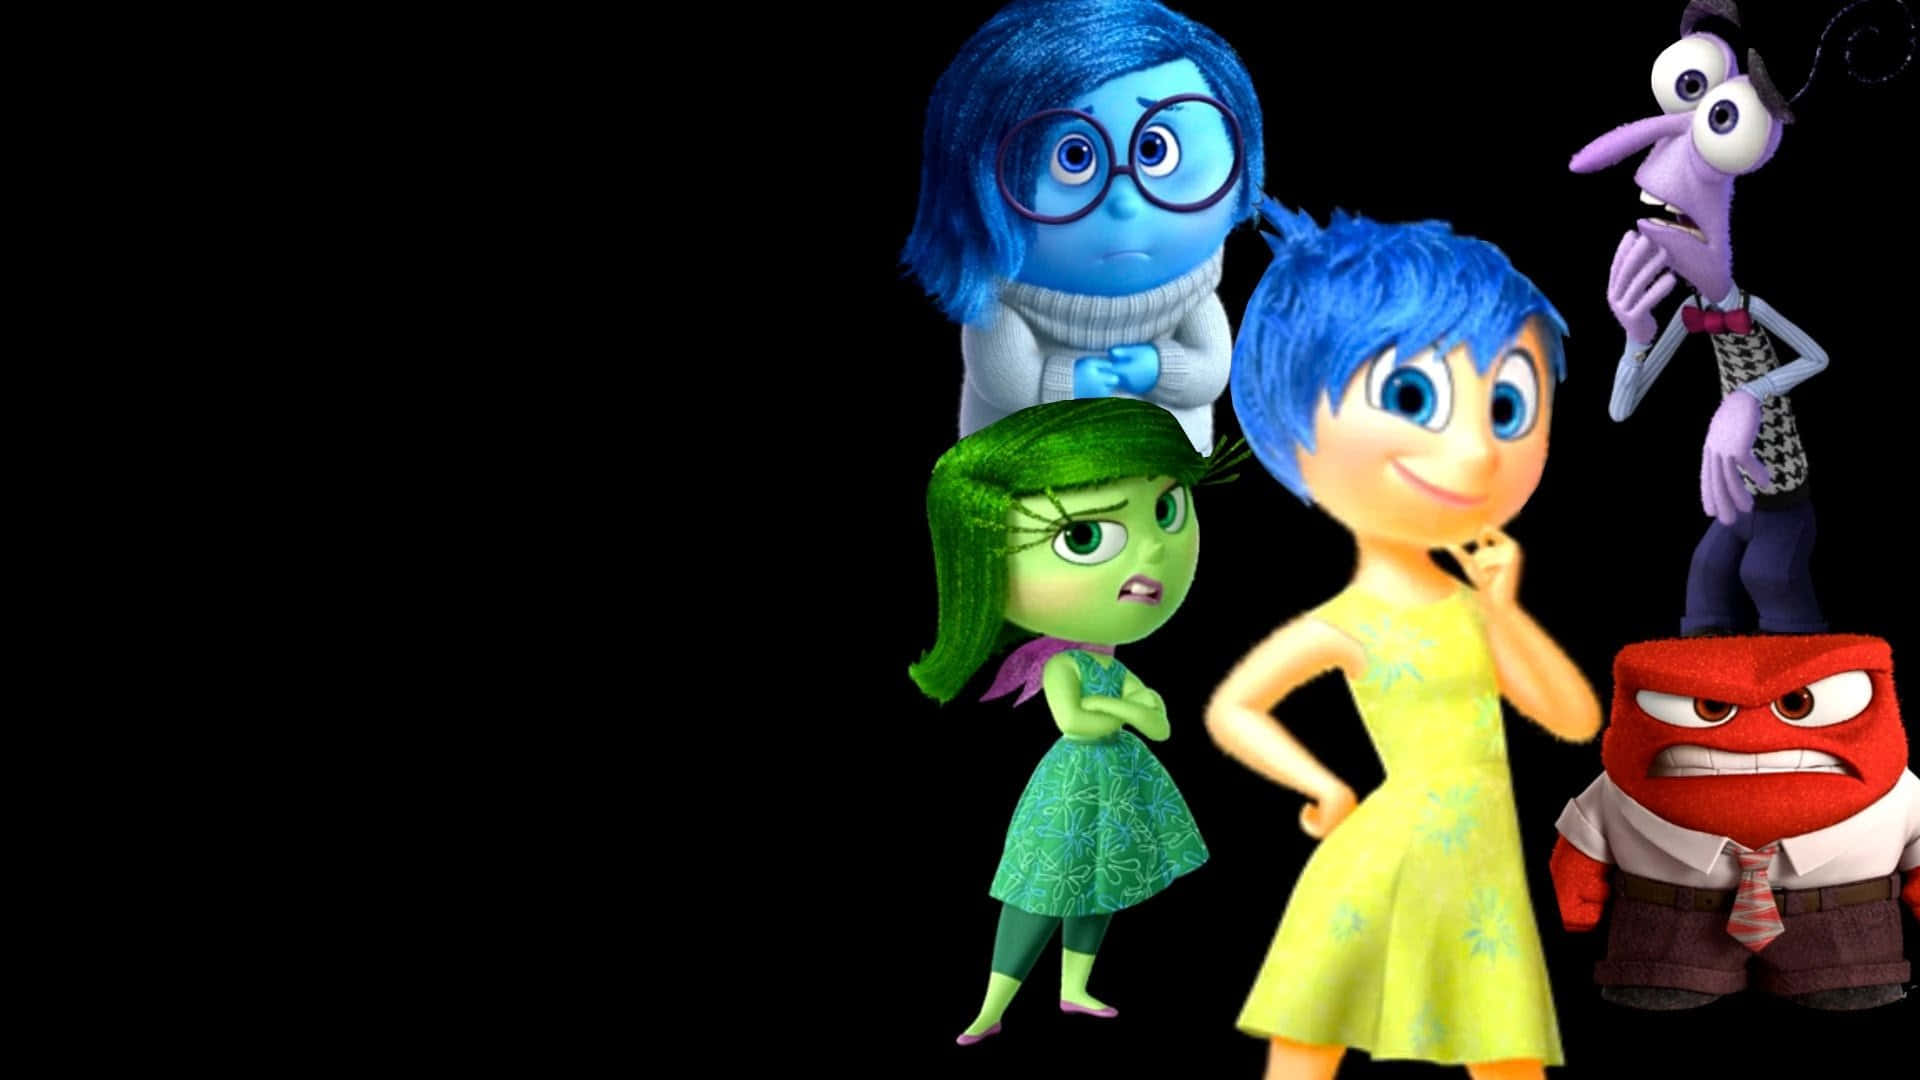 Joy from Pixar's movie, Inside Out